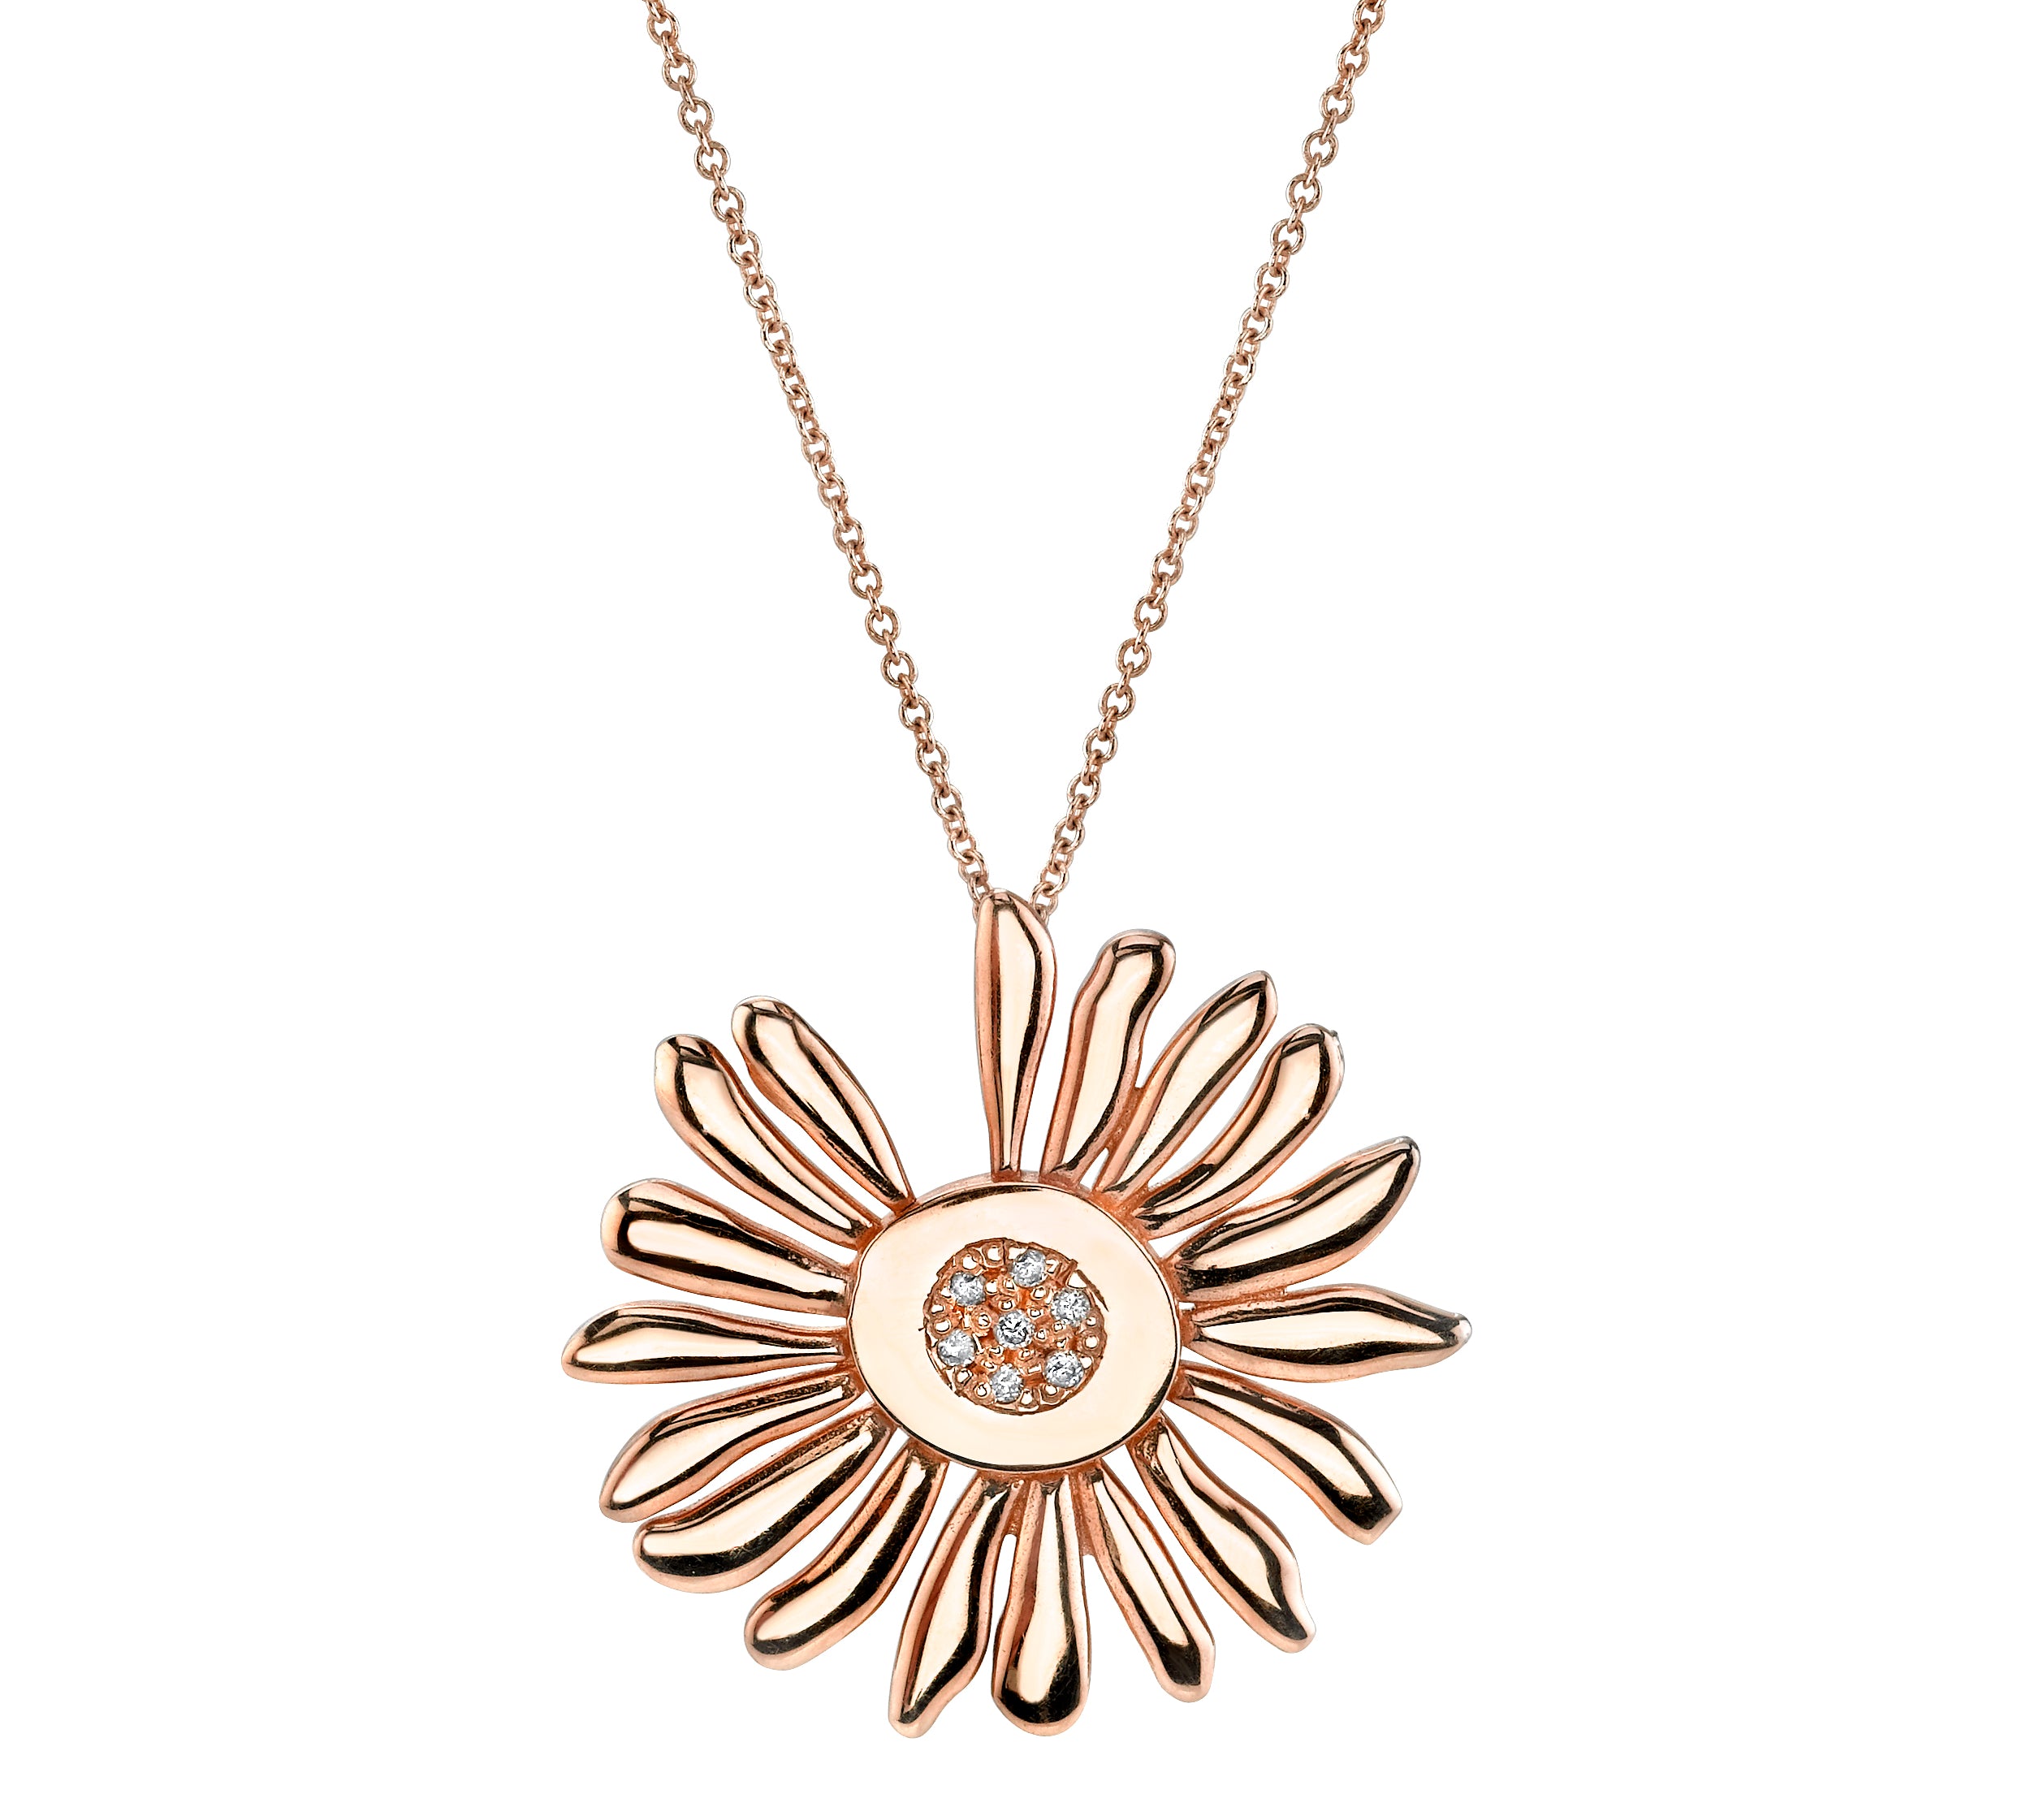 The Daisy Necklace Pendant Roseark Jewelry Rose Gold  